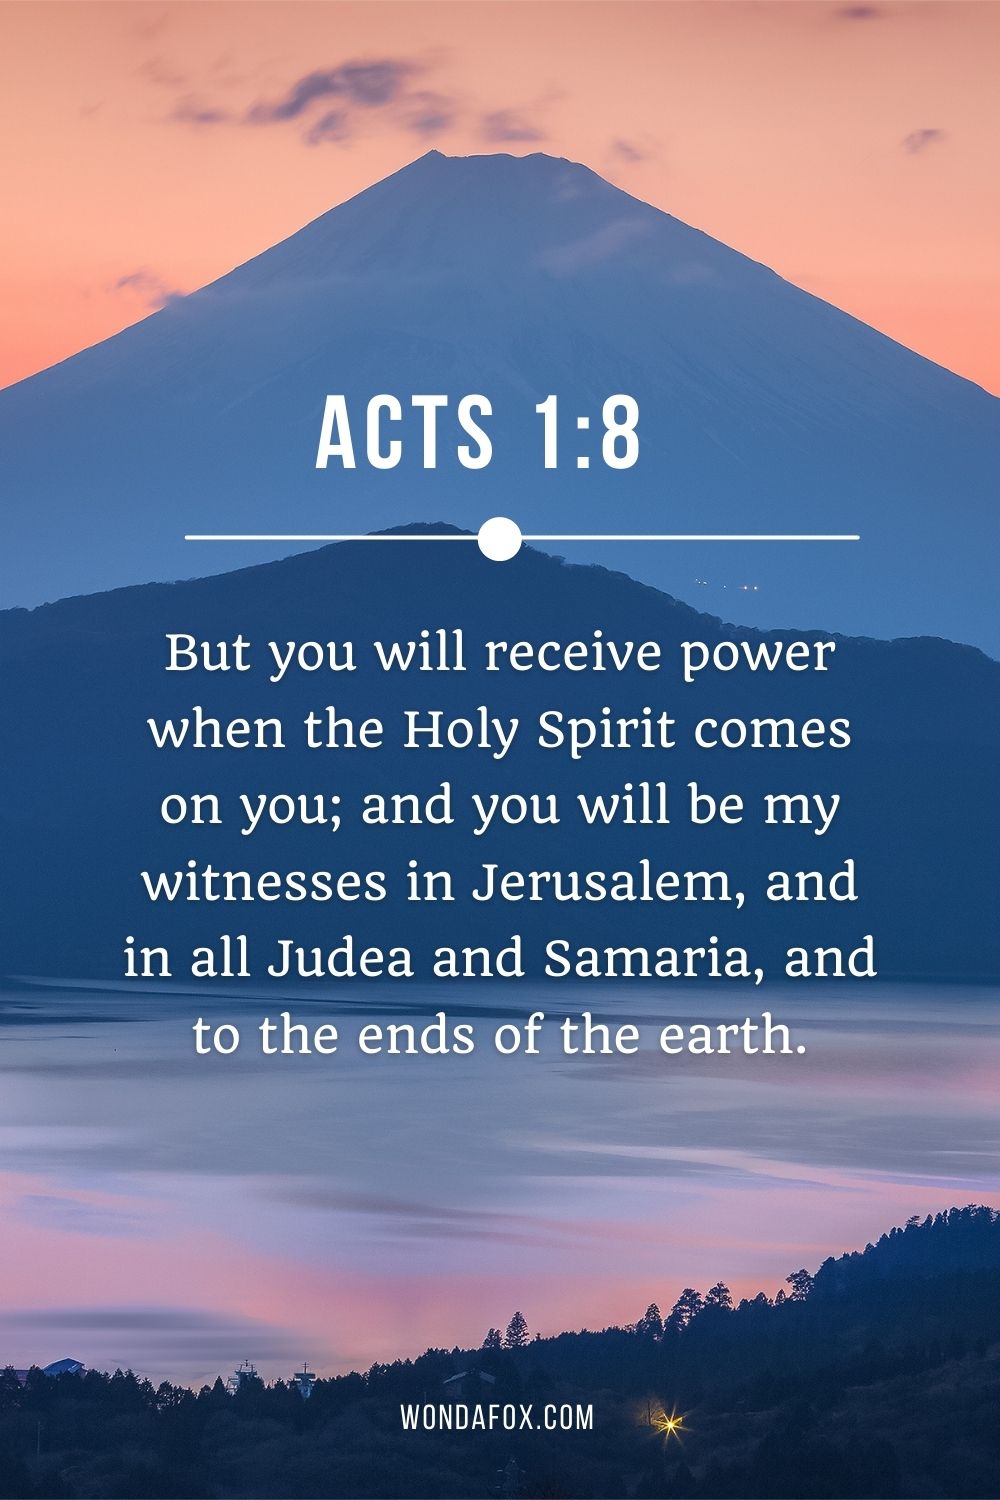 But you will receive power when the Holy Spirit comes on you; and you will be my witnesses in Jerusalem, and in all Judea and Samaria, and to the ends of the earth.